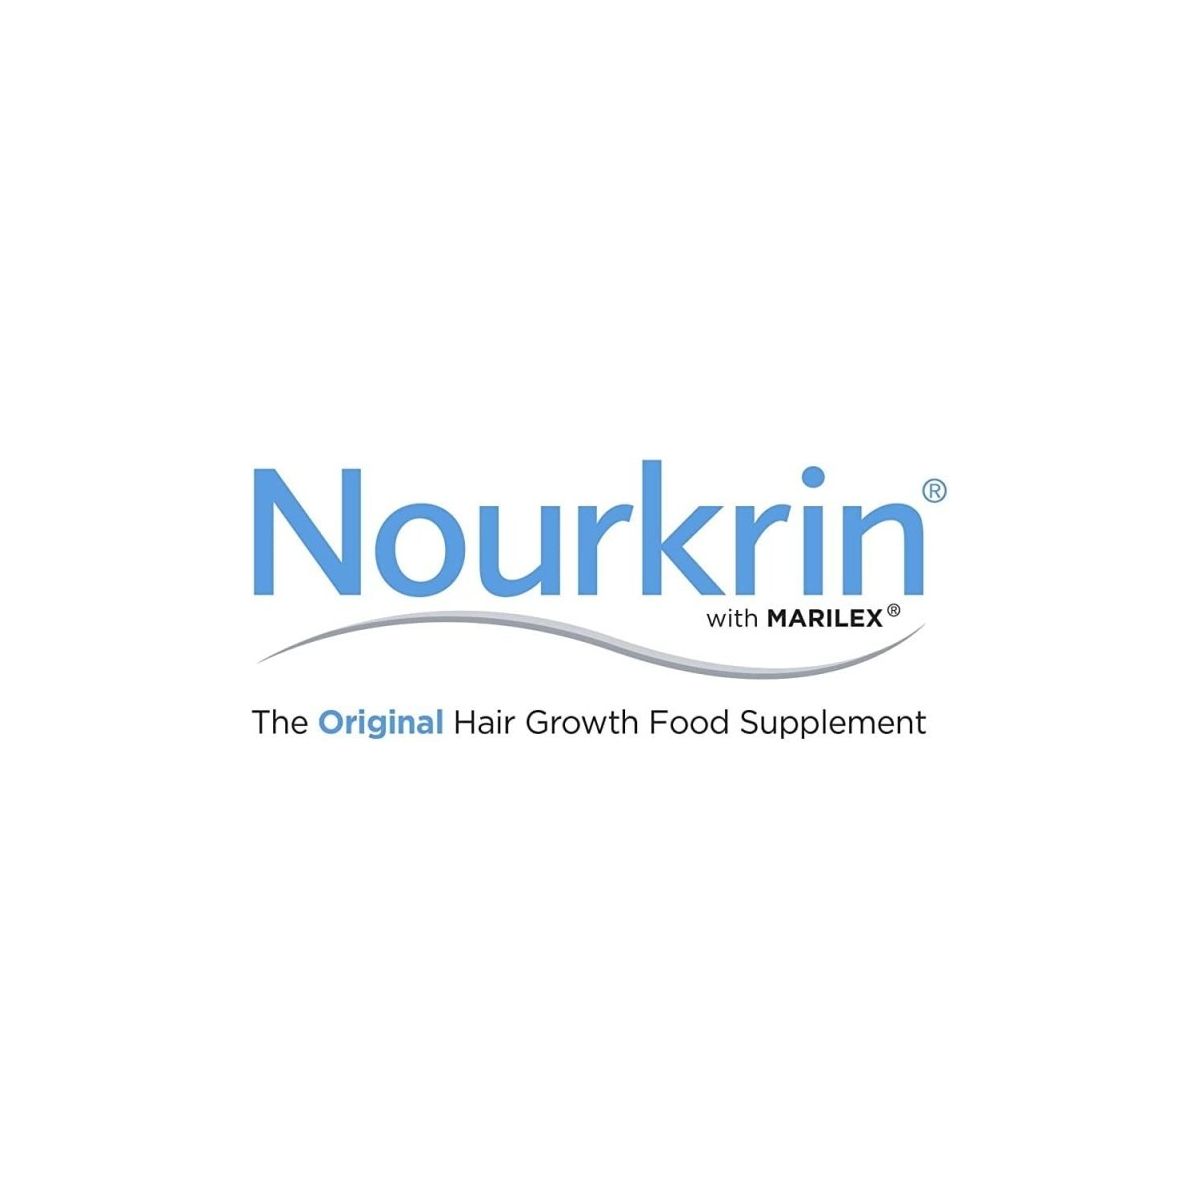 Nourkrin Woman Hair Supplement - 60 Tablets, 1 Month Supply